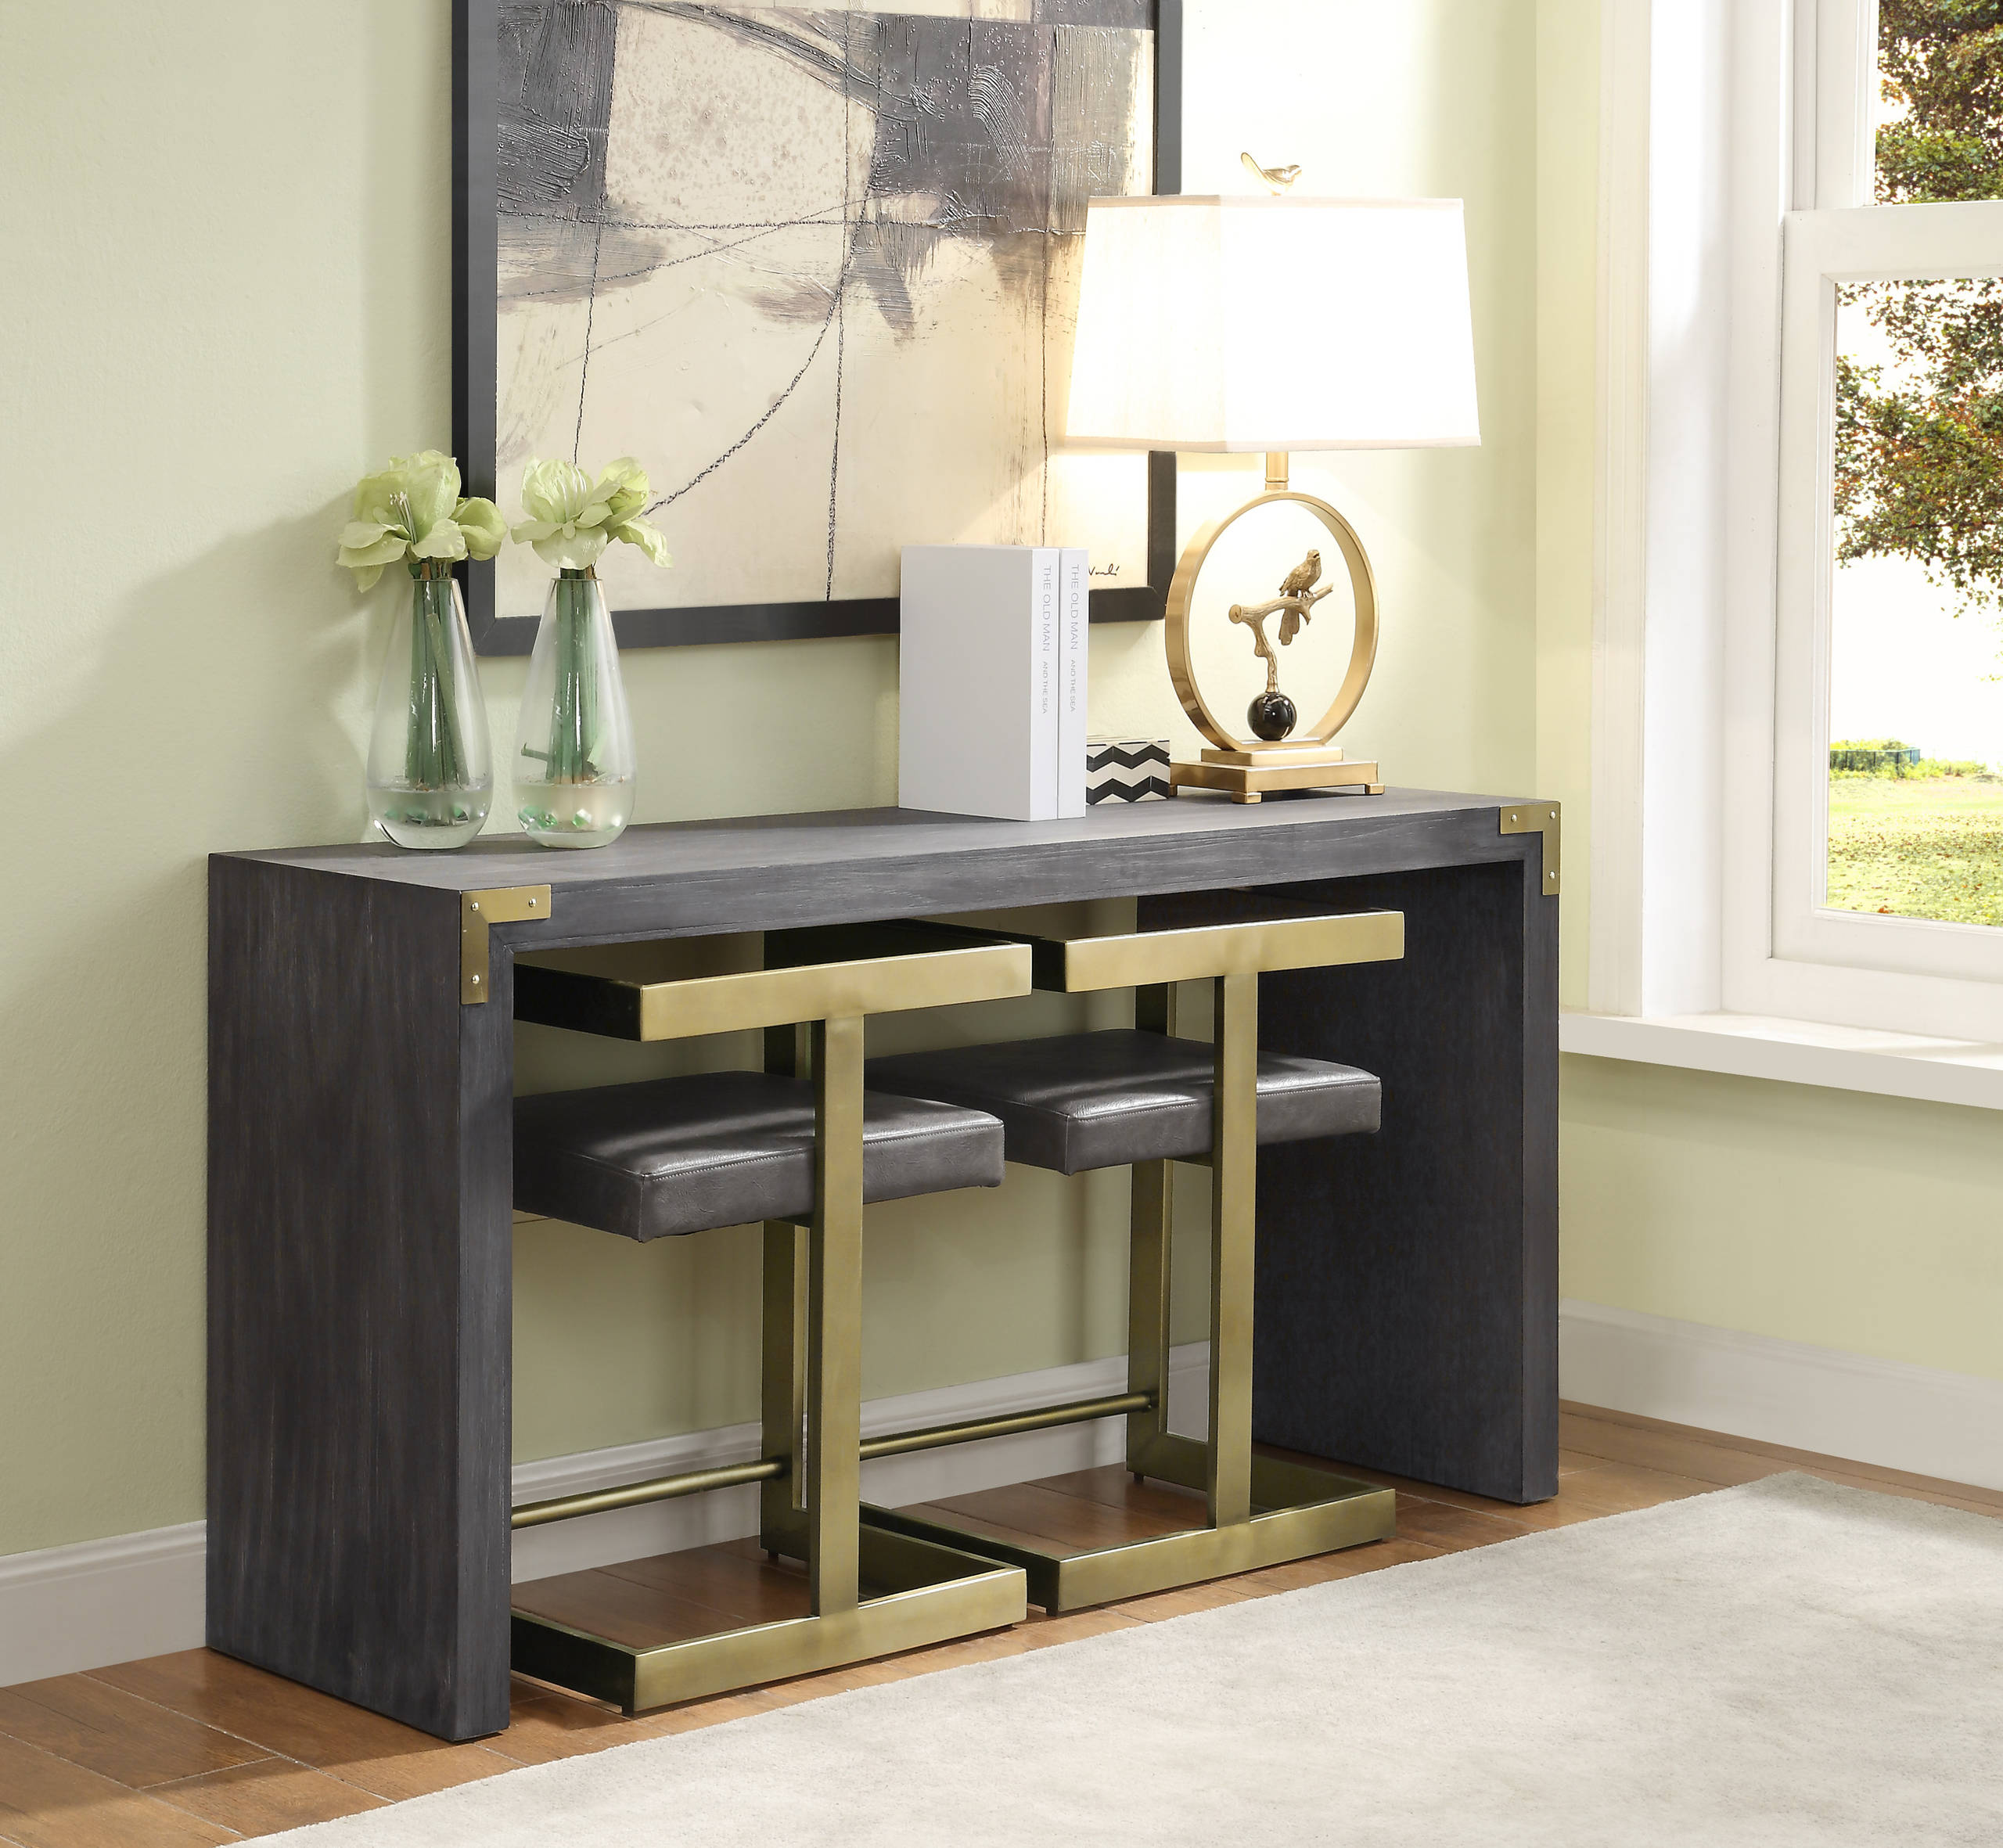 Console Table With Stool Ideas Photos, Kitchen Console Table With Stools